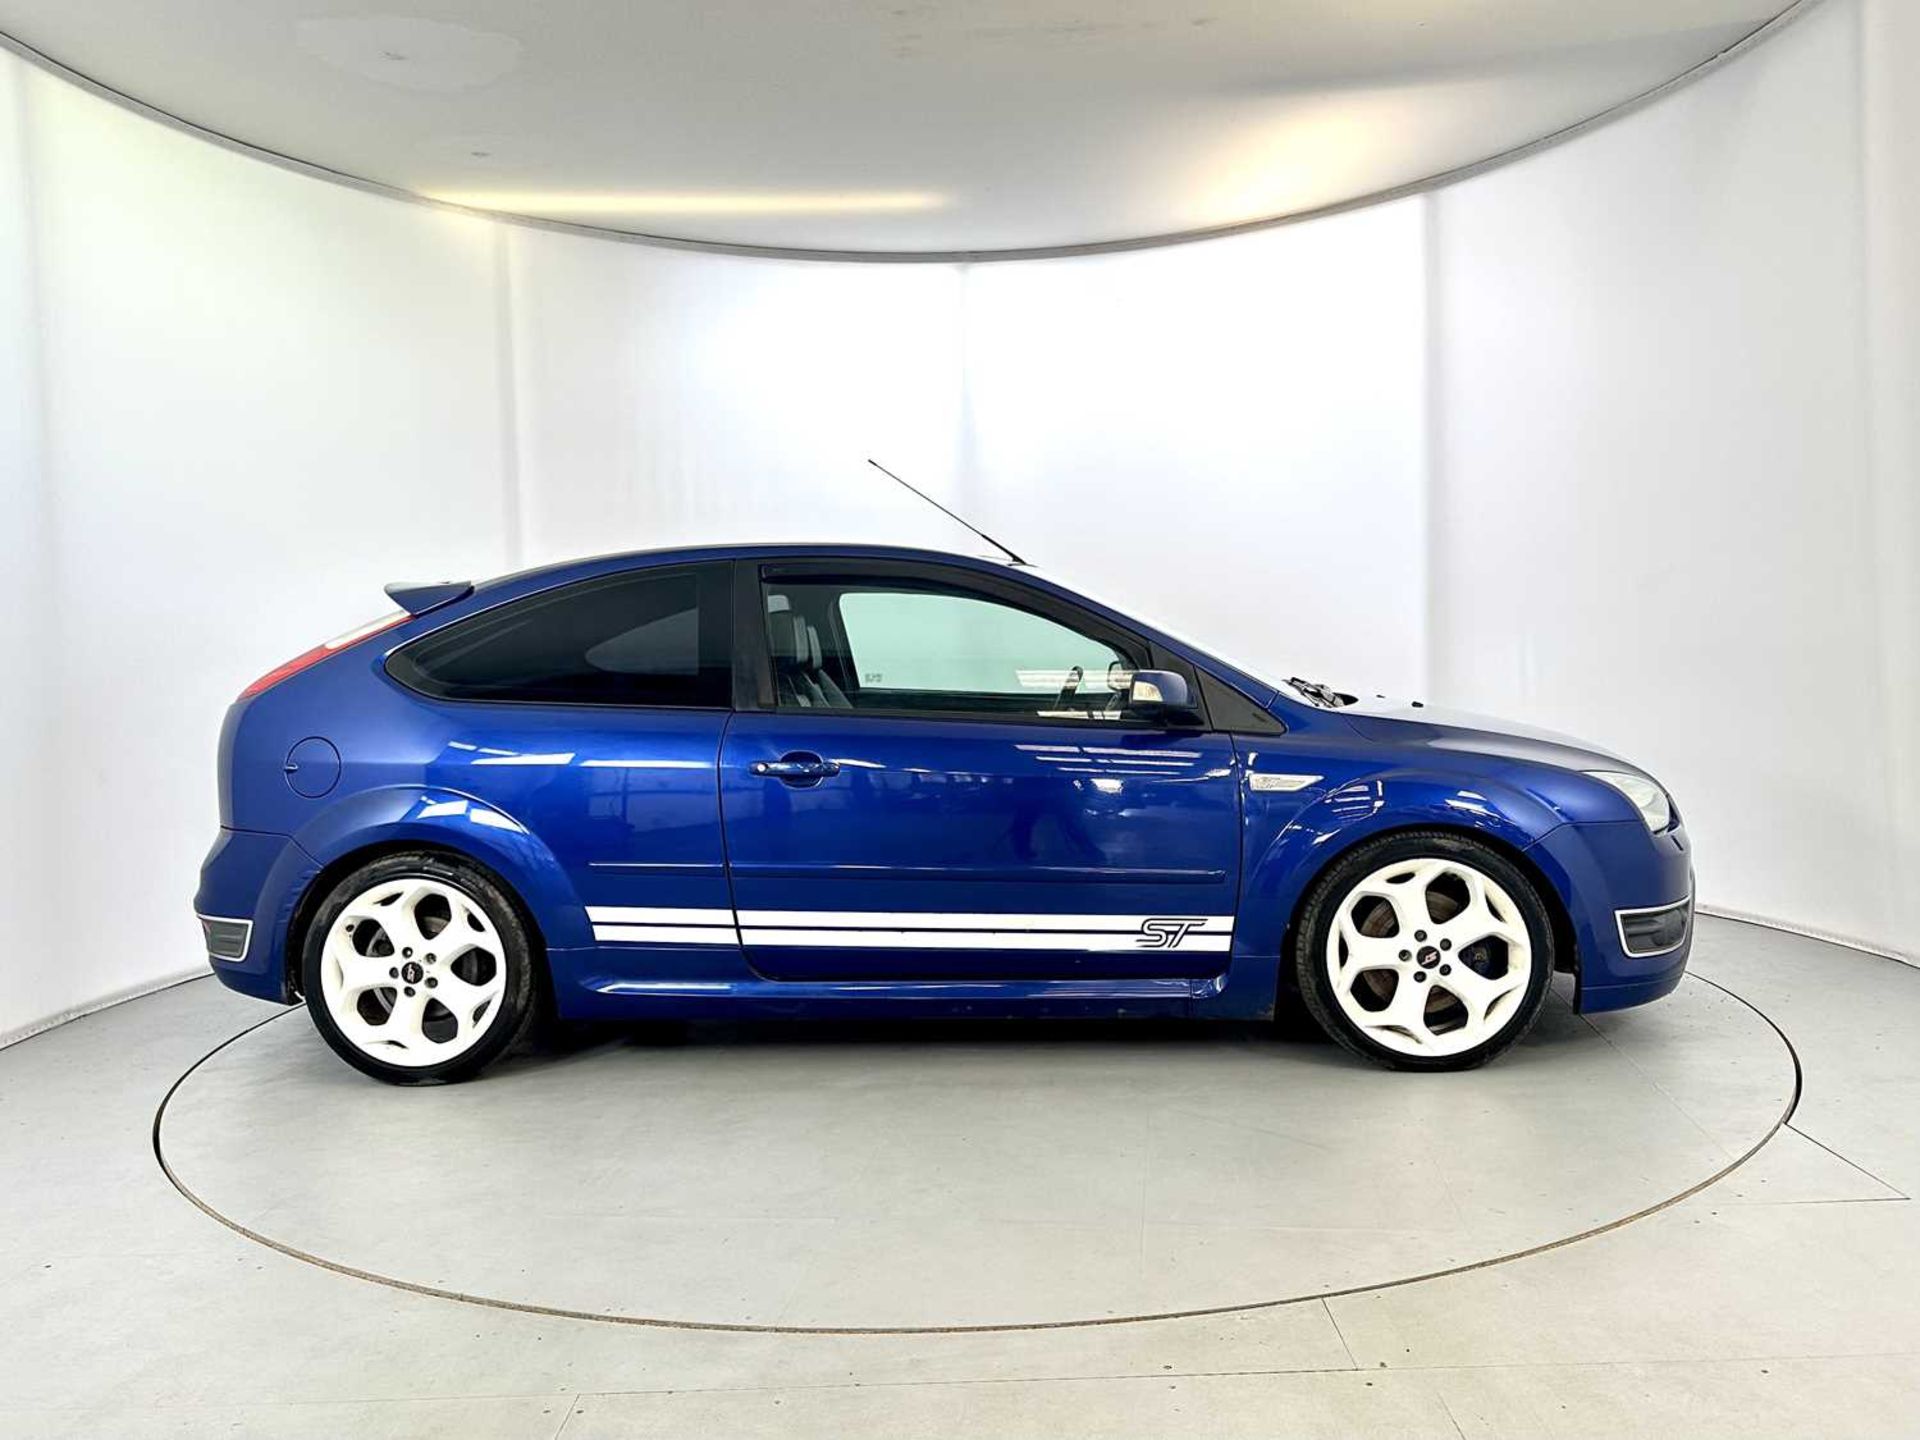 2006 Ford Focus ST-2 - Image 11 of 30